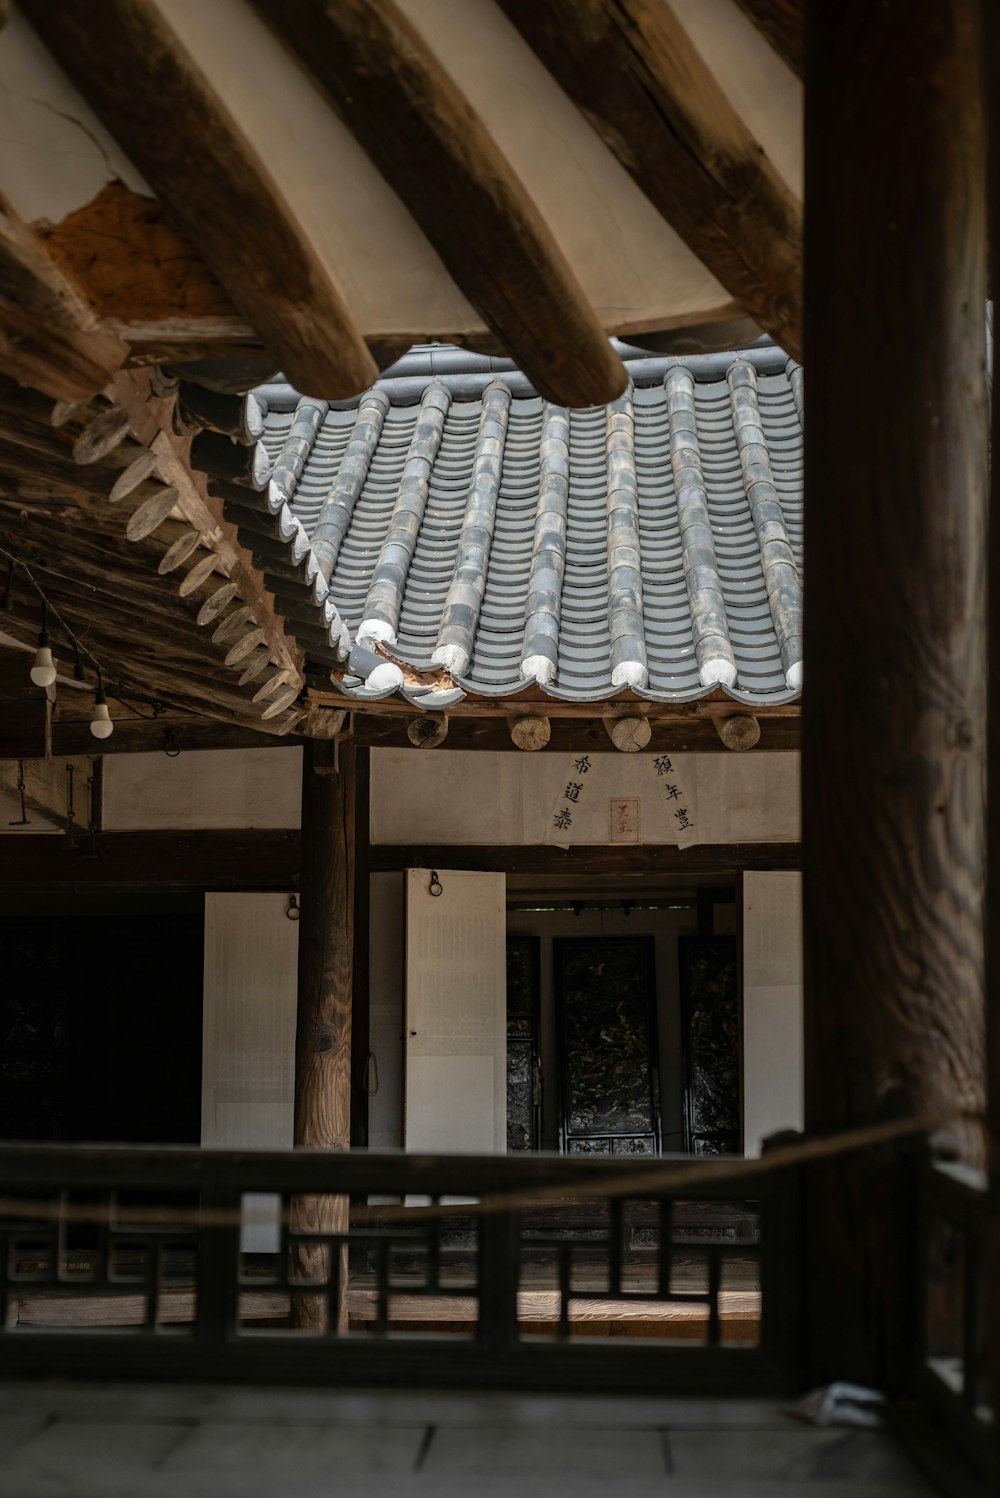 the roof of a building with wooden beams